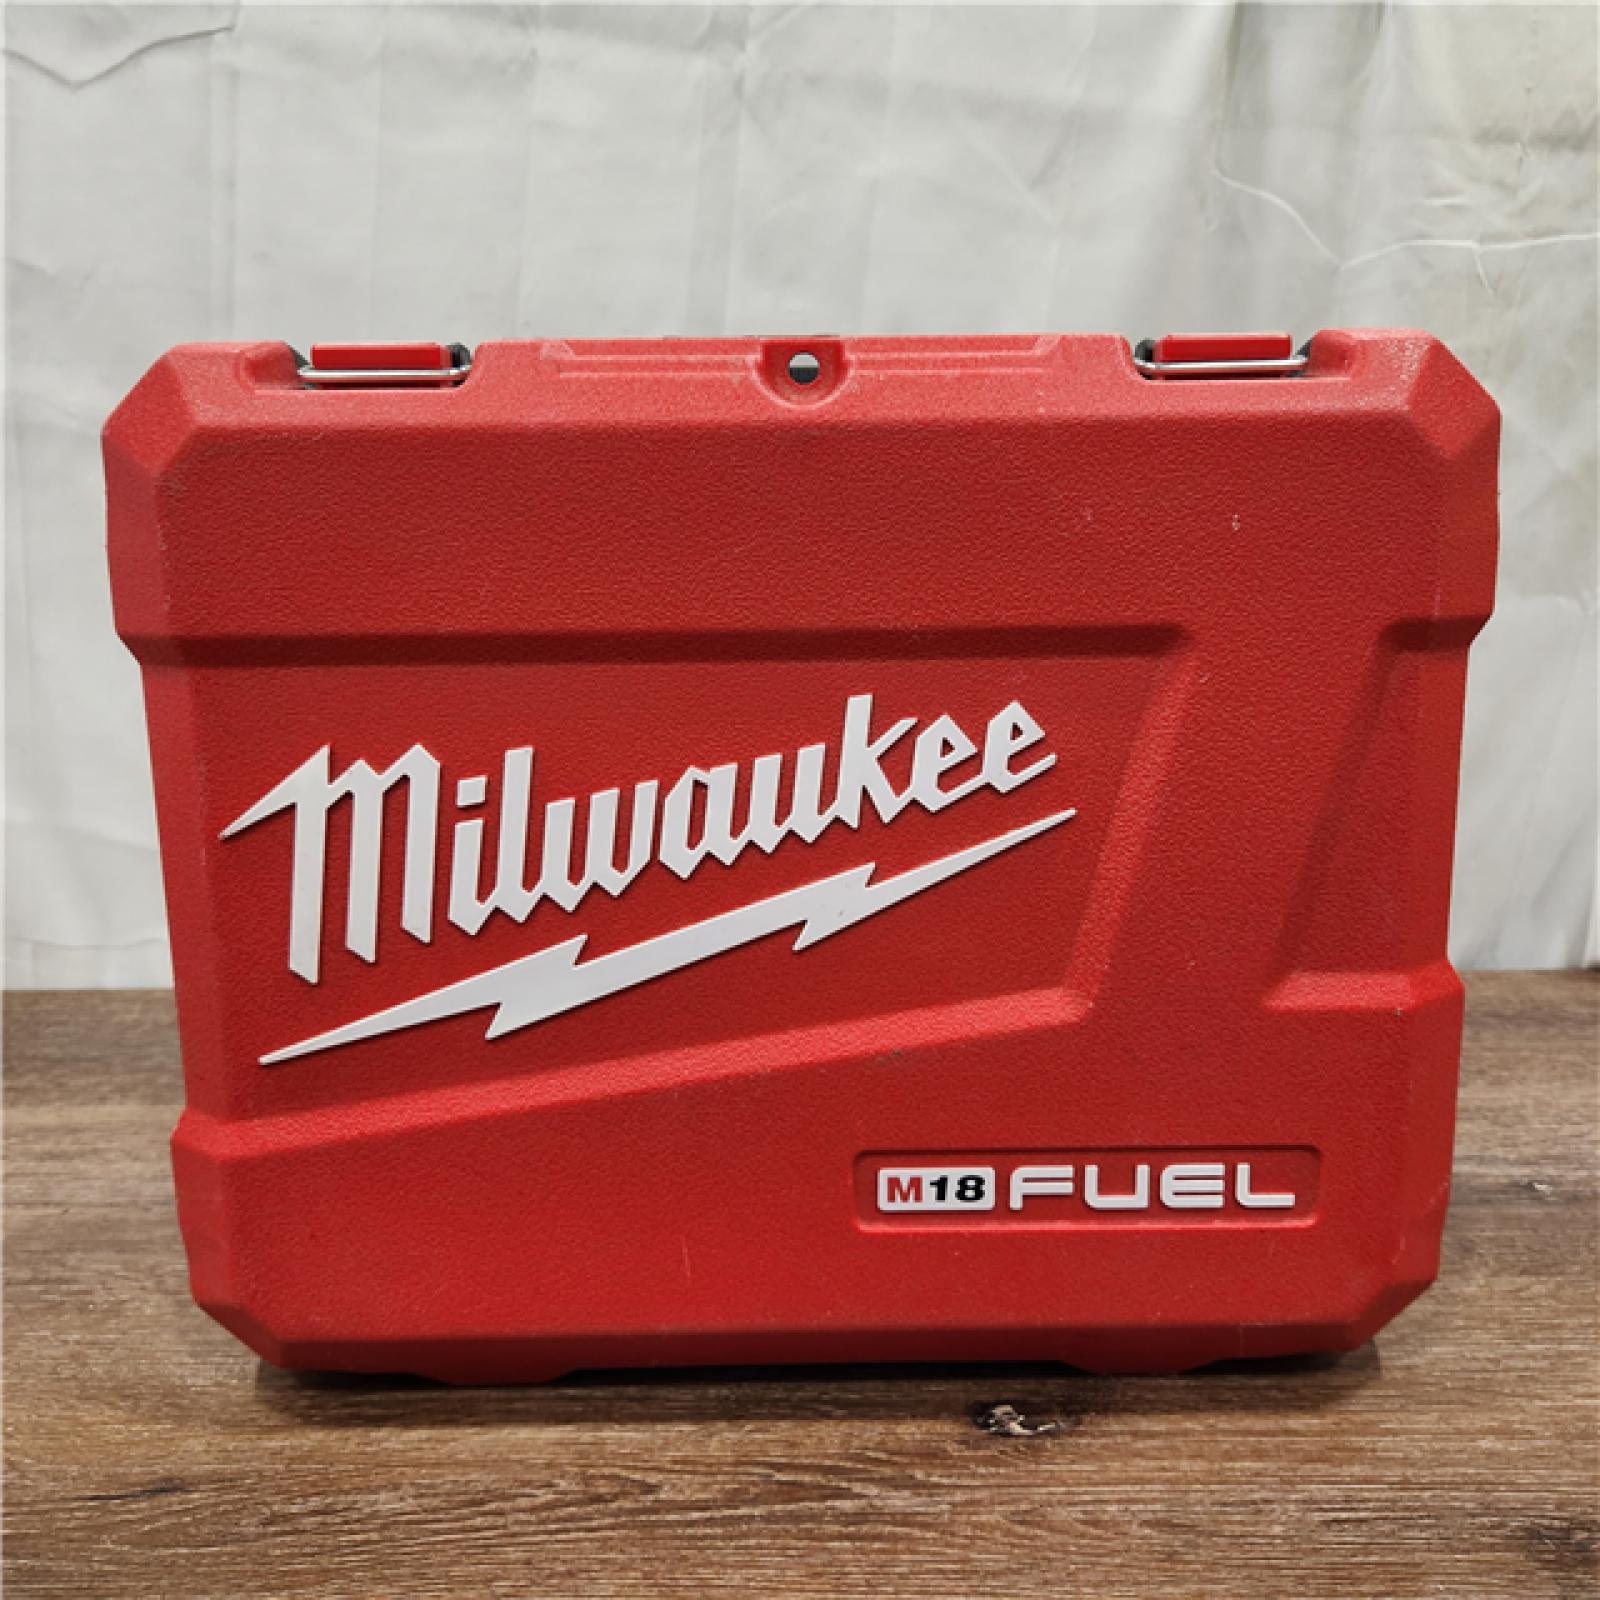 AS-IS Milwaukee 2767-22R M18 FUEL 1/2 High Torque Impact Wrench with Friction Ring Kit (5.0 Ah Resistant Batteries)